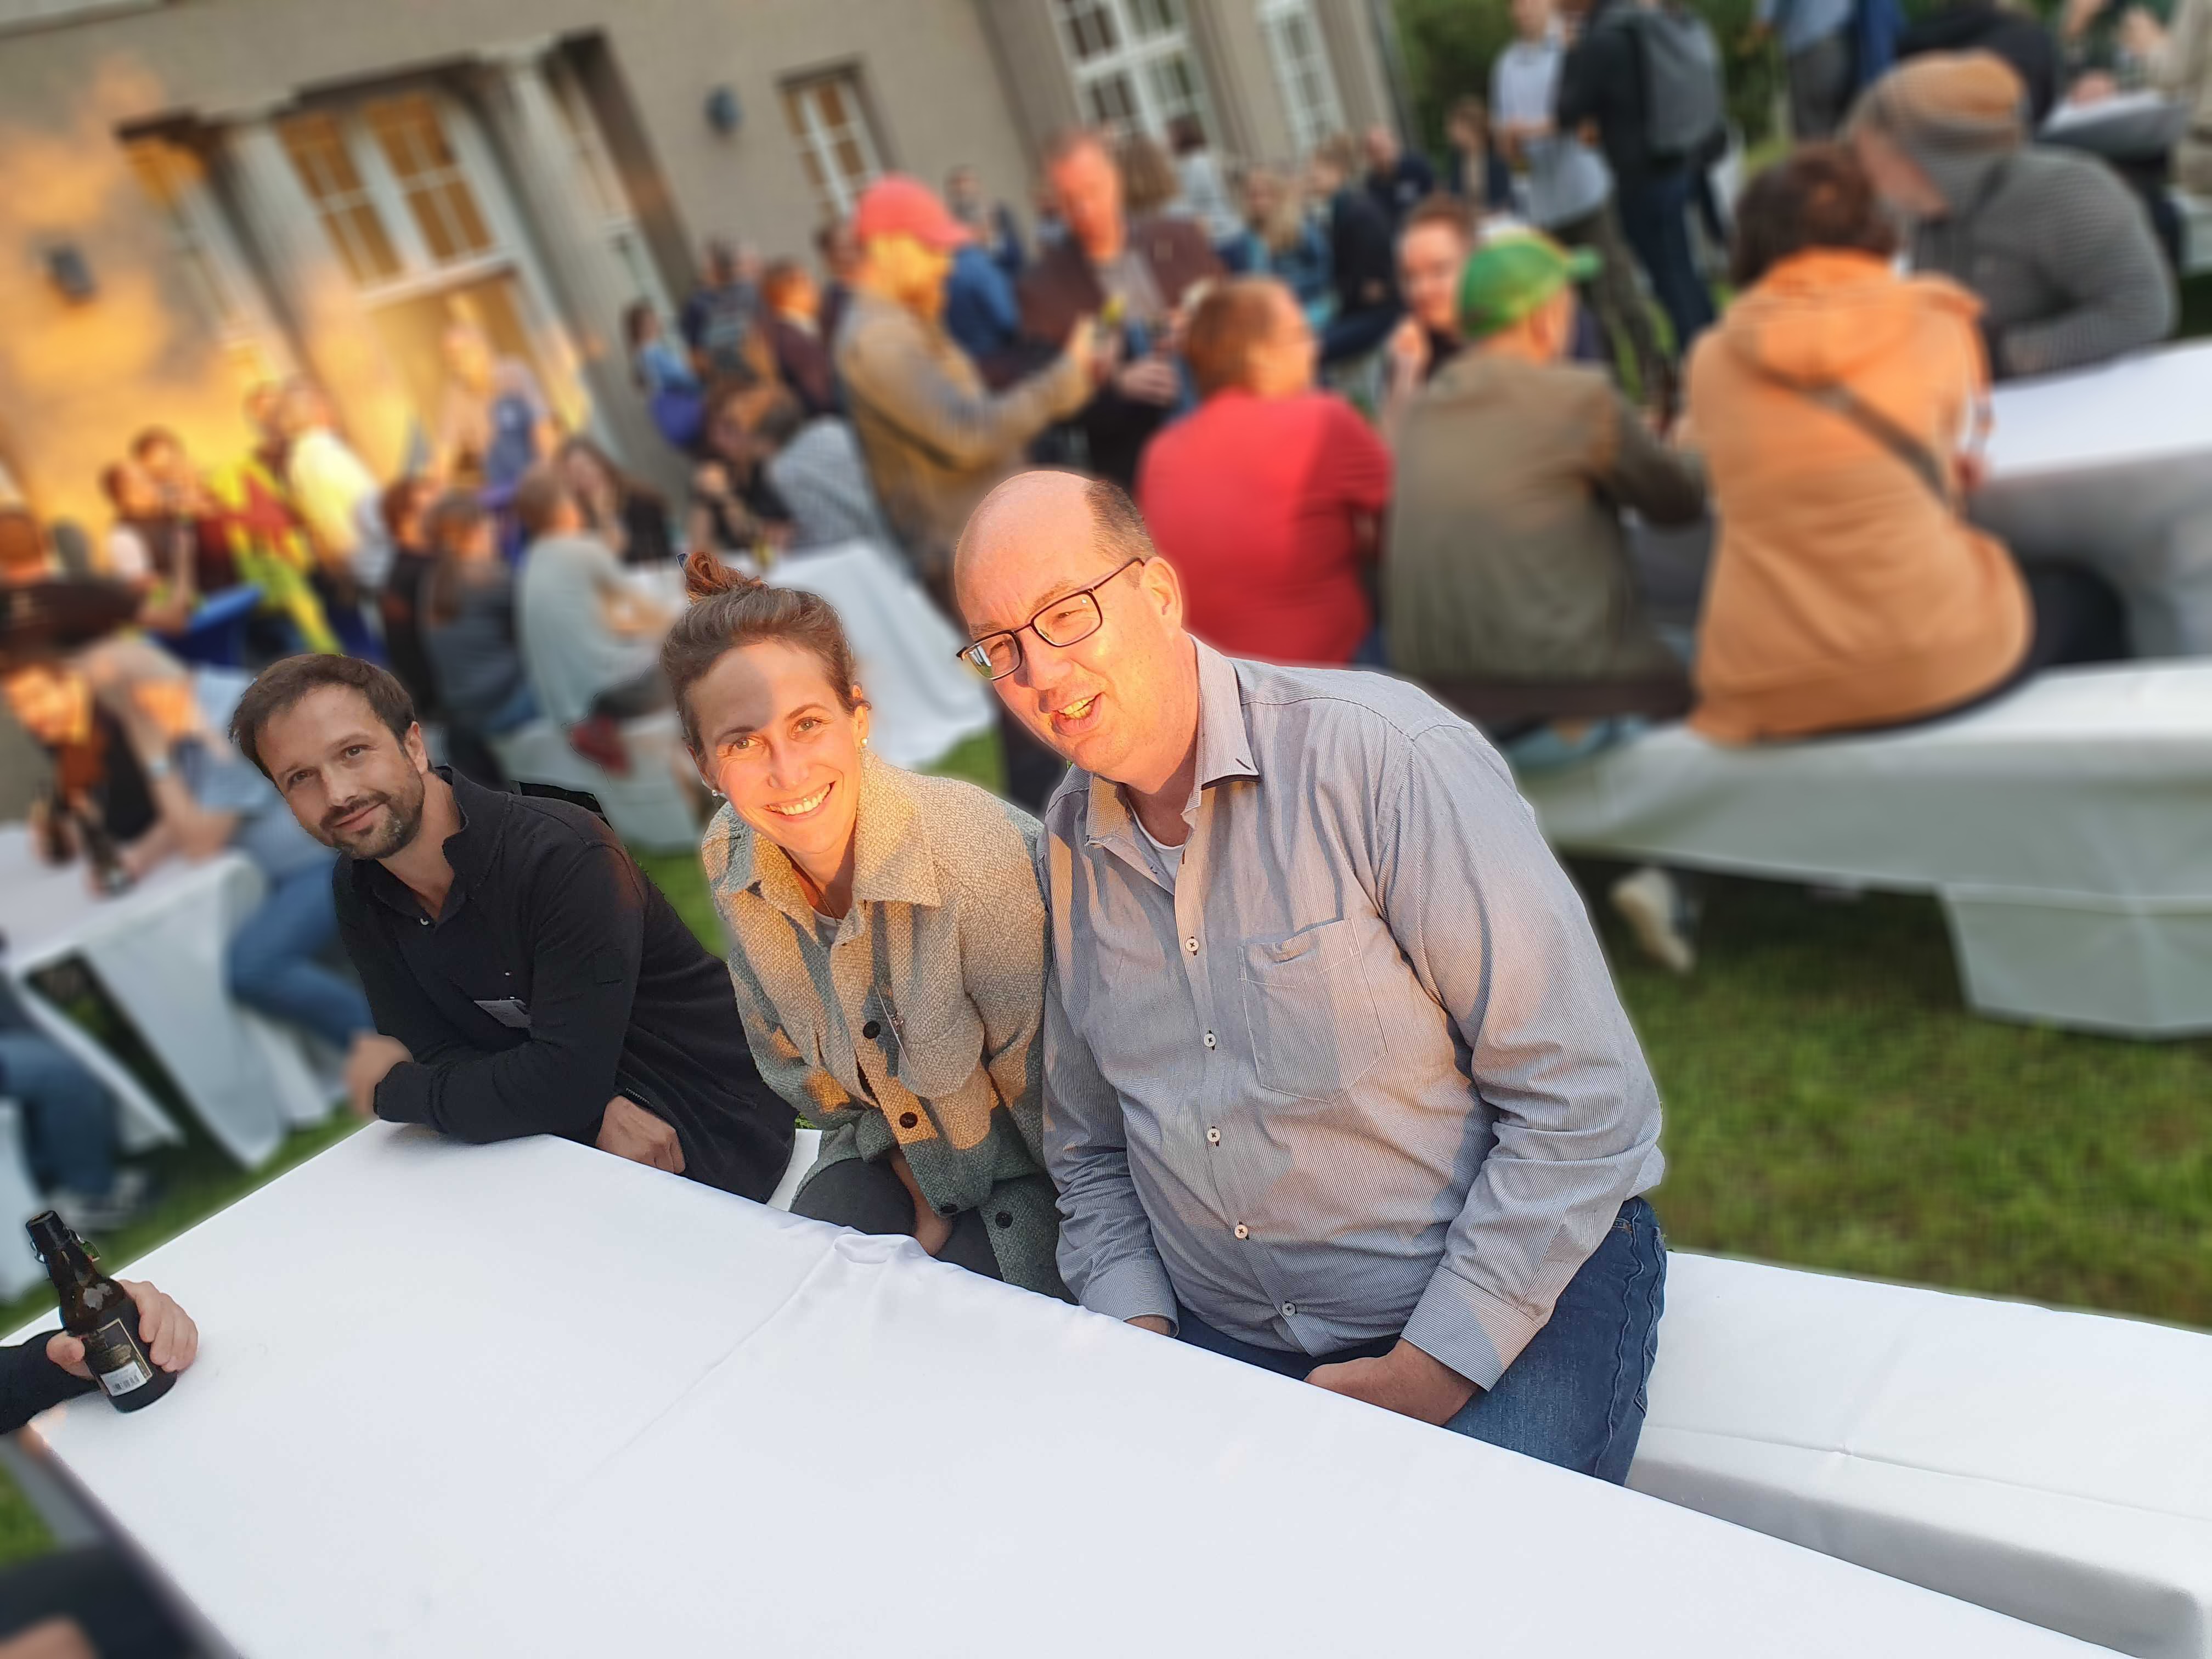 Image of the garden of the evening event at the TYPO3 University Days with participants seetinat white covered tabels